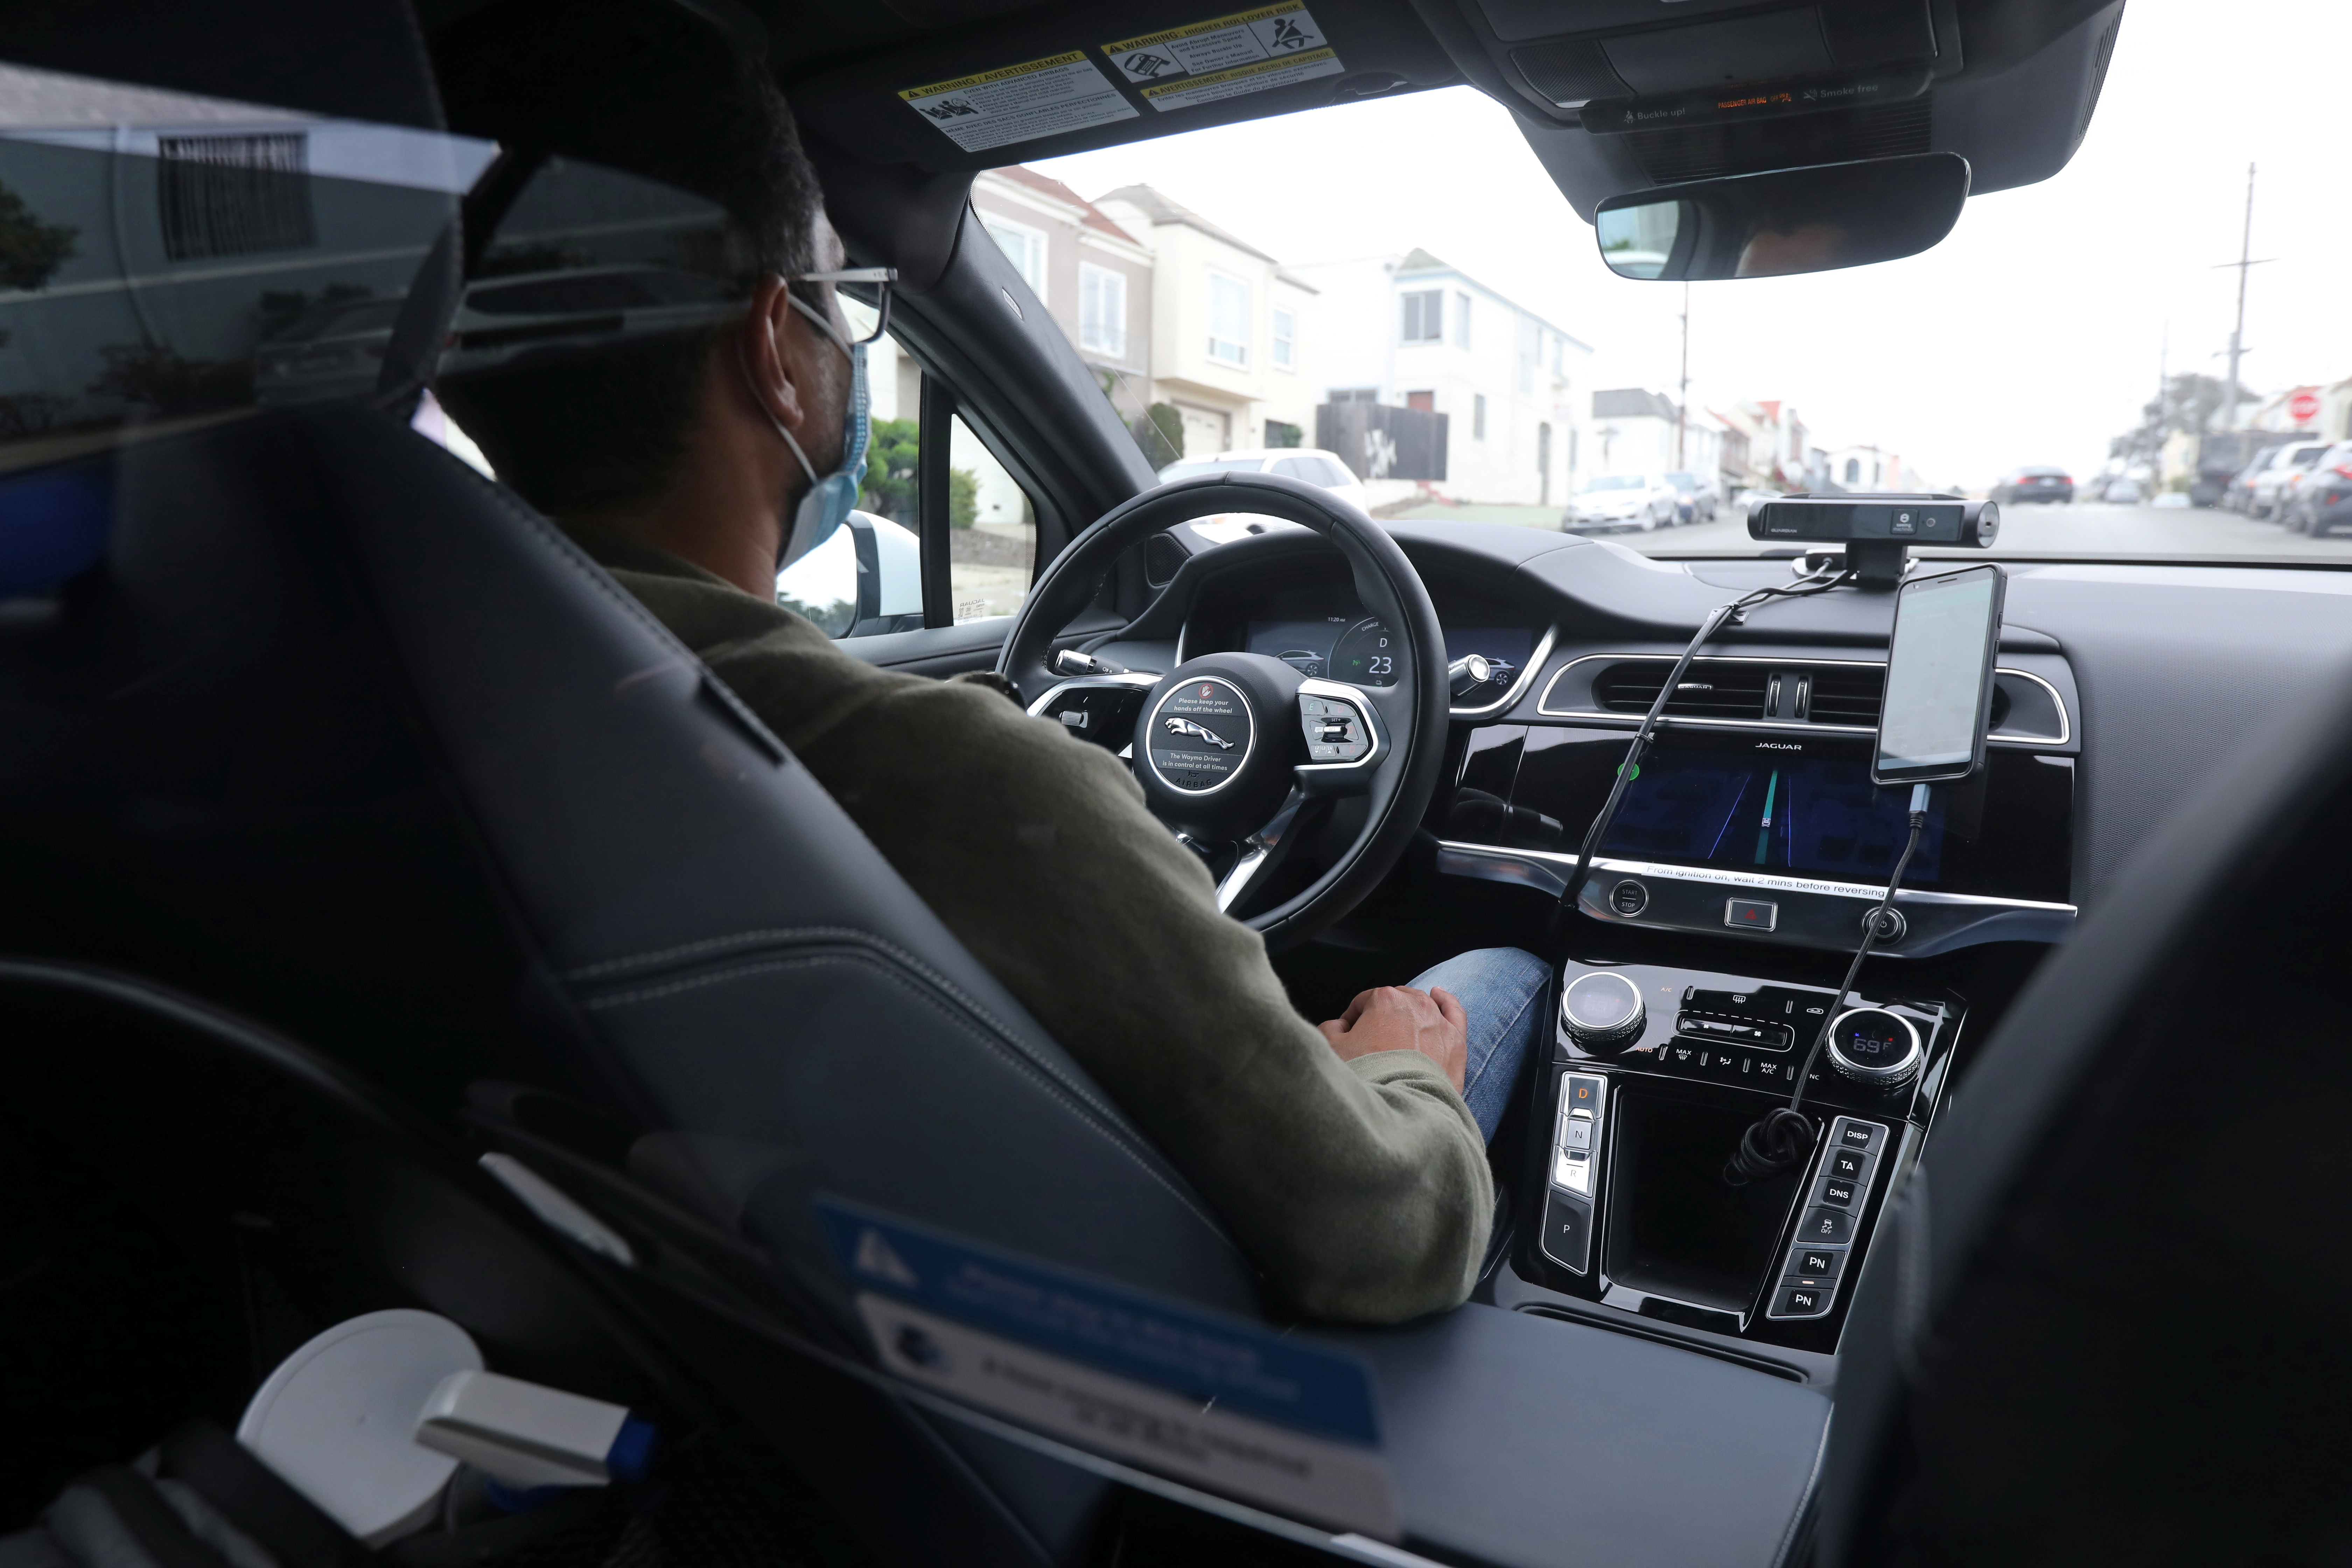 A safety operator is seen in the front seat of a self-driving Waymo vehicle in San Francisco